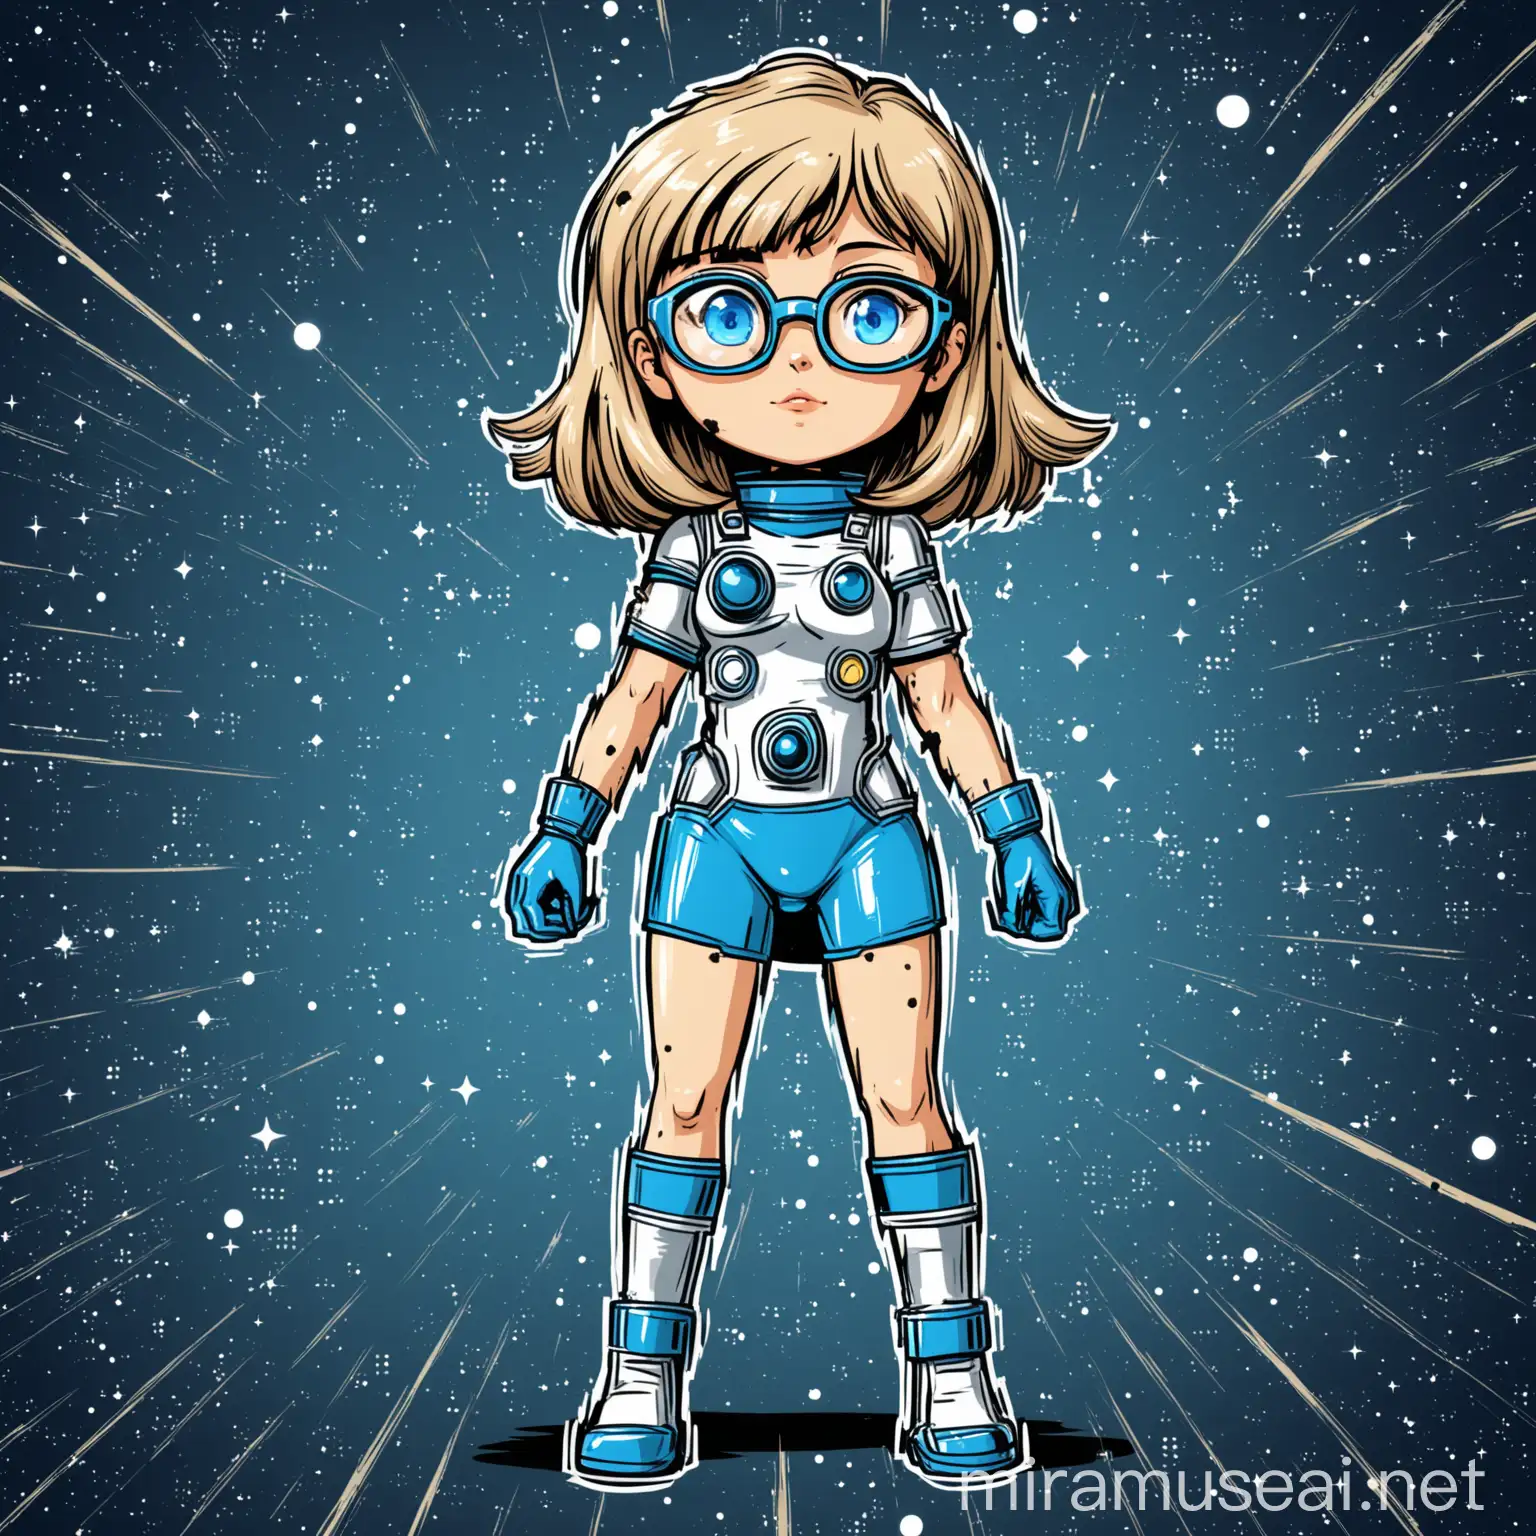 astro girl, full body in comic style, caucasian, with dirty blonde/light brown hair and bangs, and blue eyes with glasses